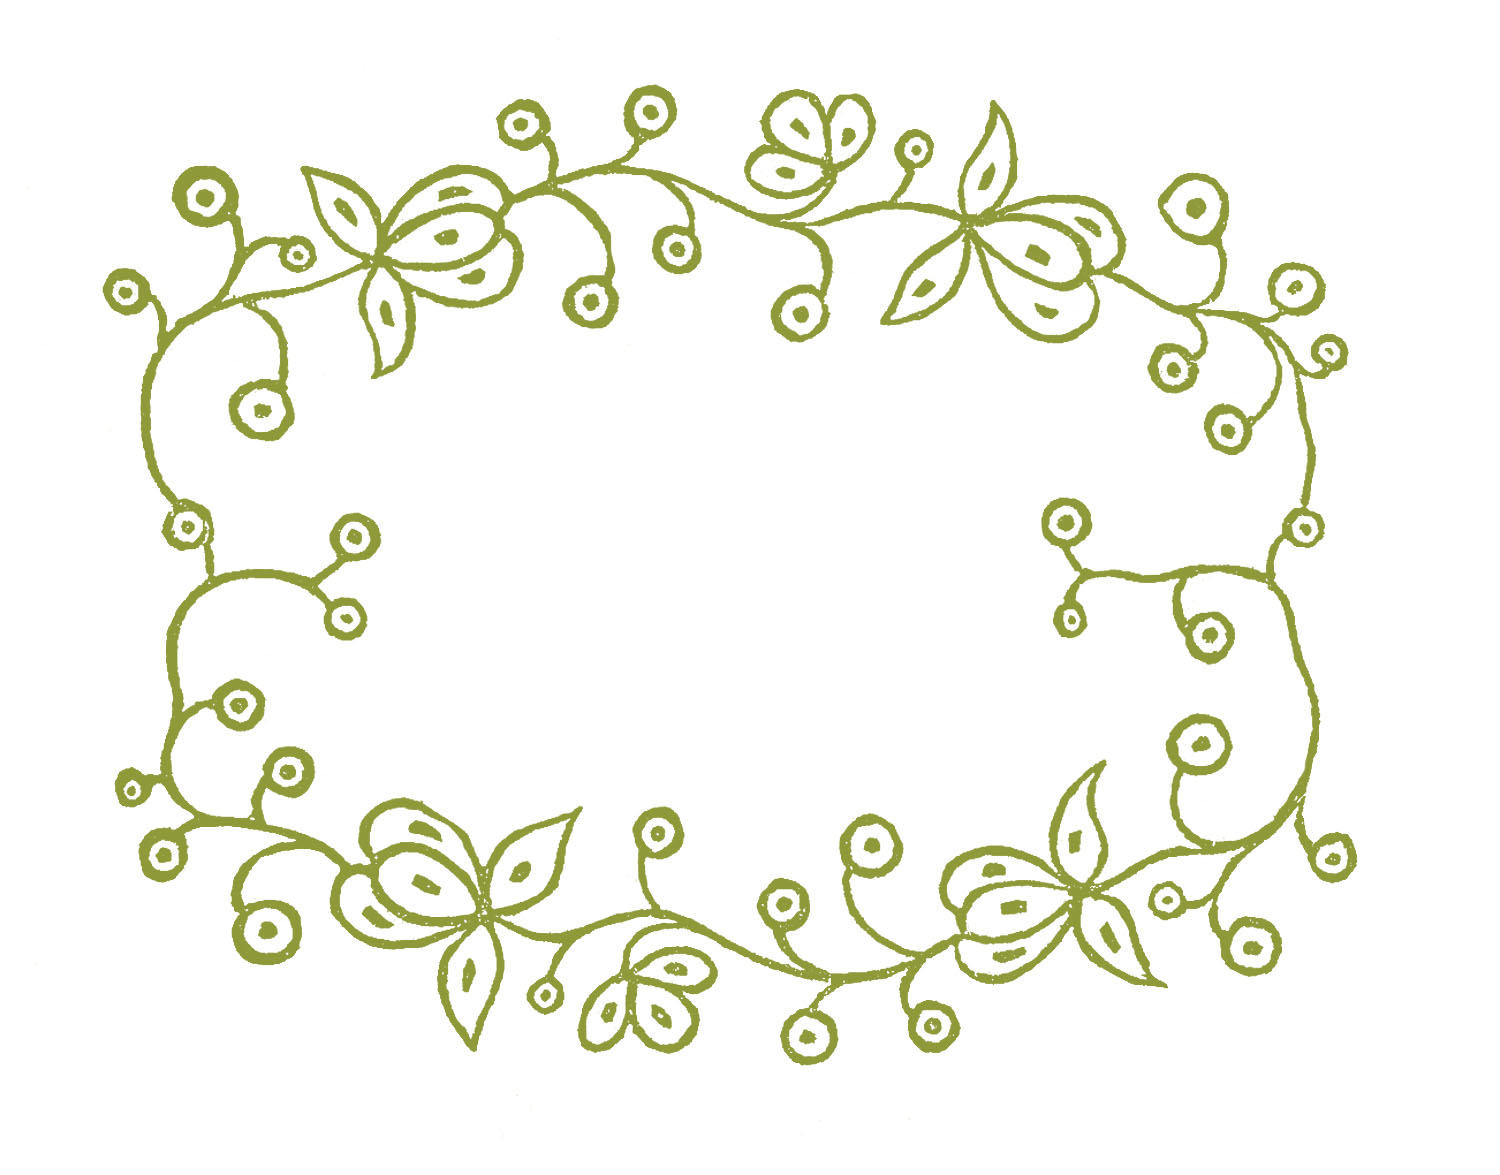 Hand Embroidery Patterns Free Vintage Royalty Free Images Embroidery Patterns Floral Frames The